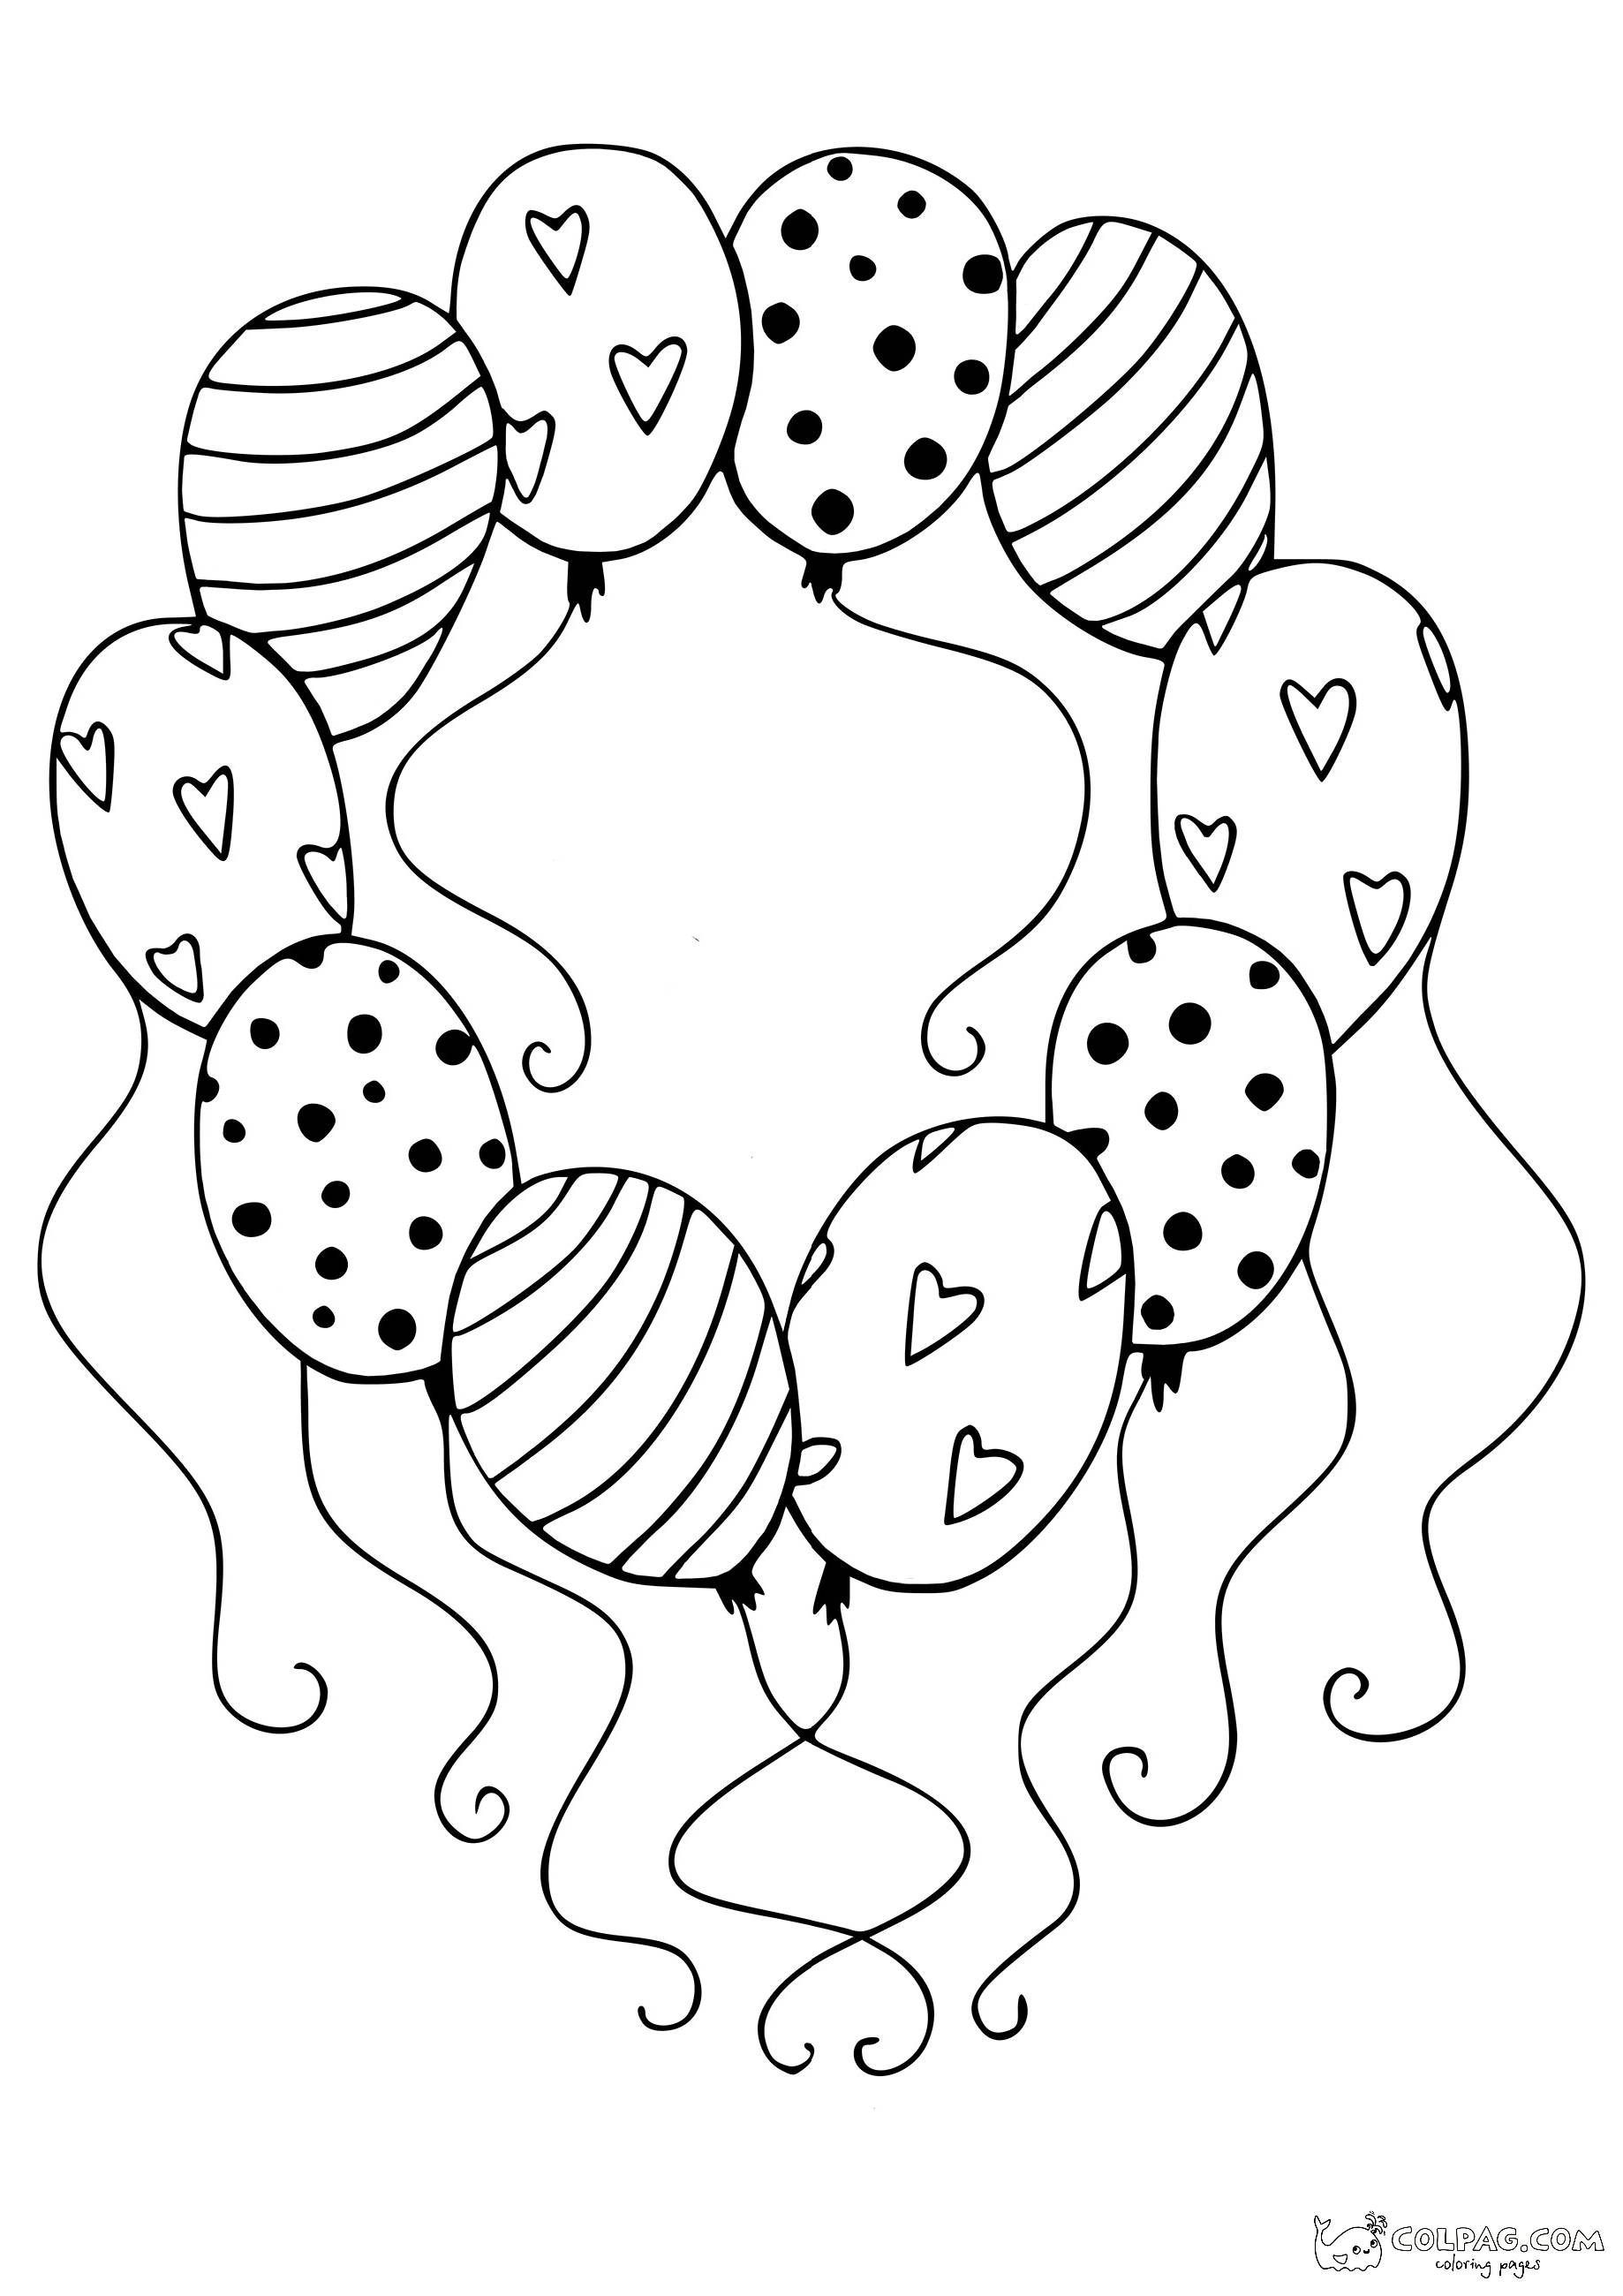 22-lots-of-different-baloons-coloring-page-colpag-22